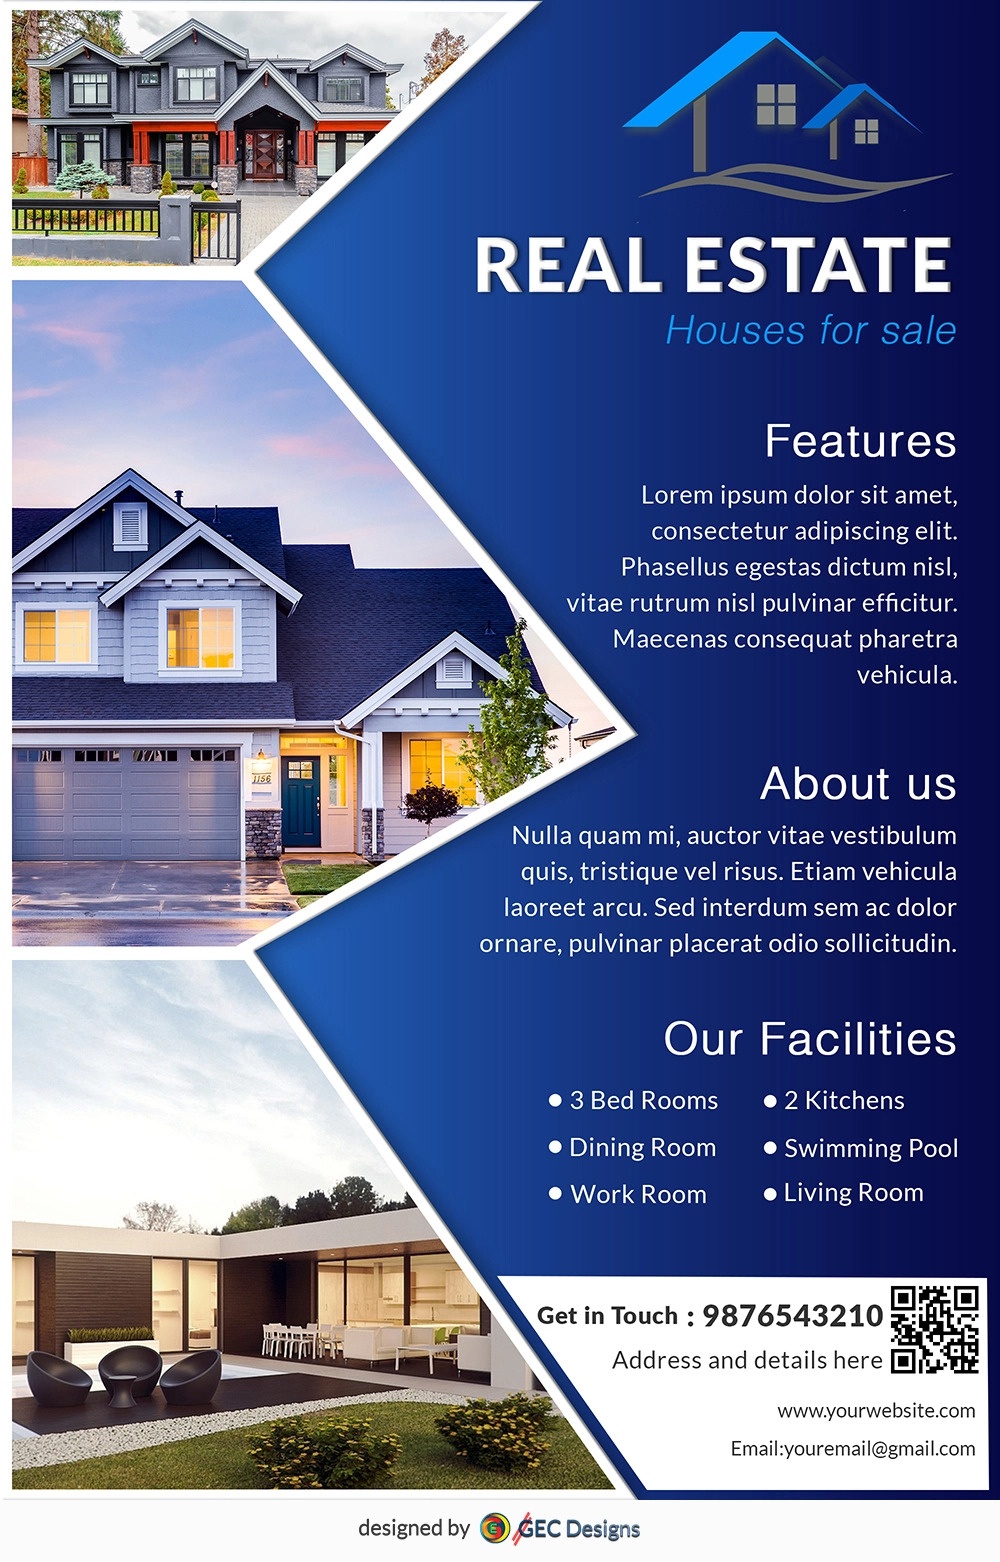 Download Free House For Sale Real Estate Flyer Design Templates - Free Printable Real Estate Flyer Templates